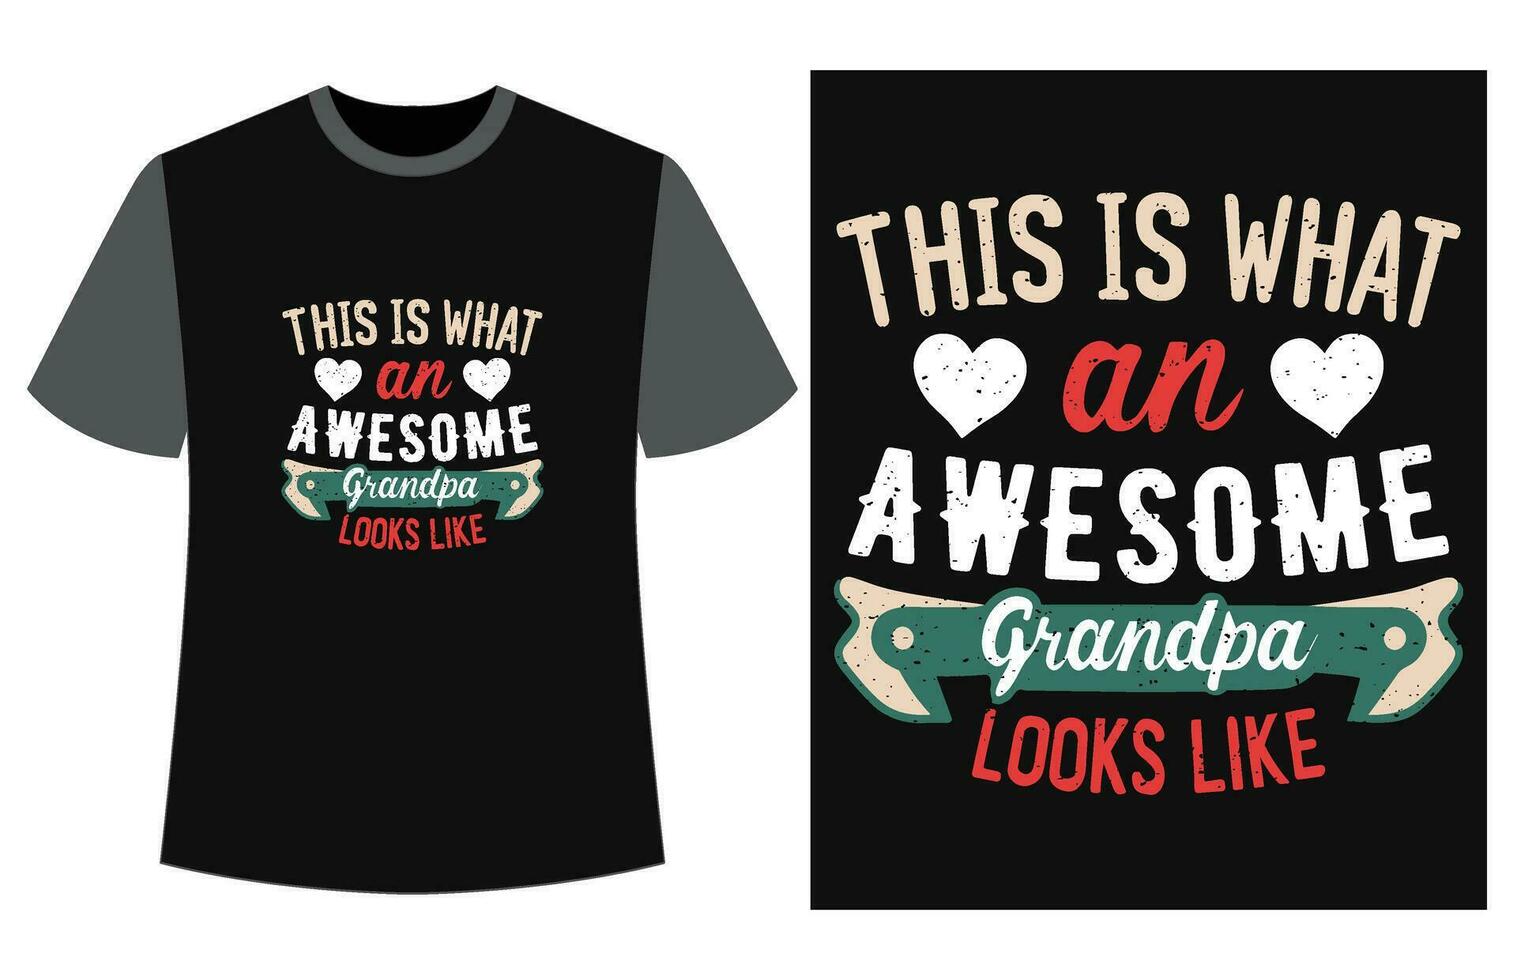 Happy Grandparents Day t-shirt vector, funny vintage Grandparents Day t-shirt design vector